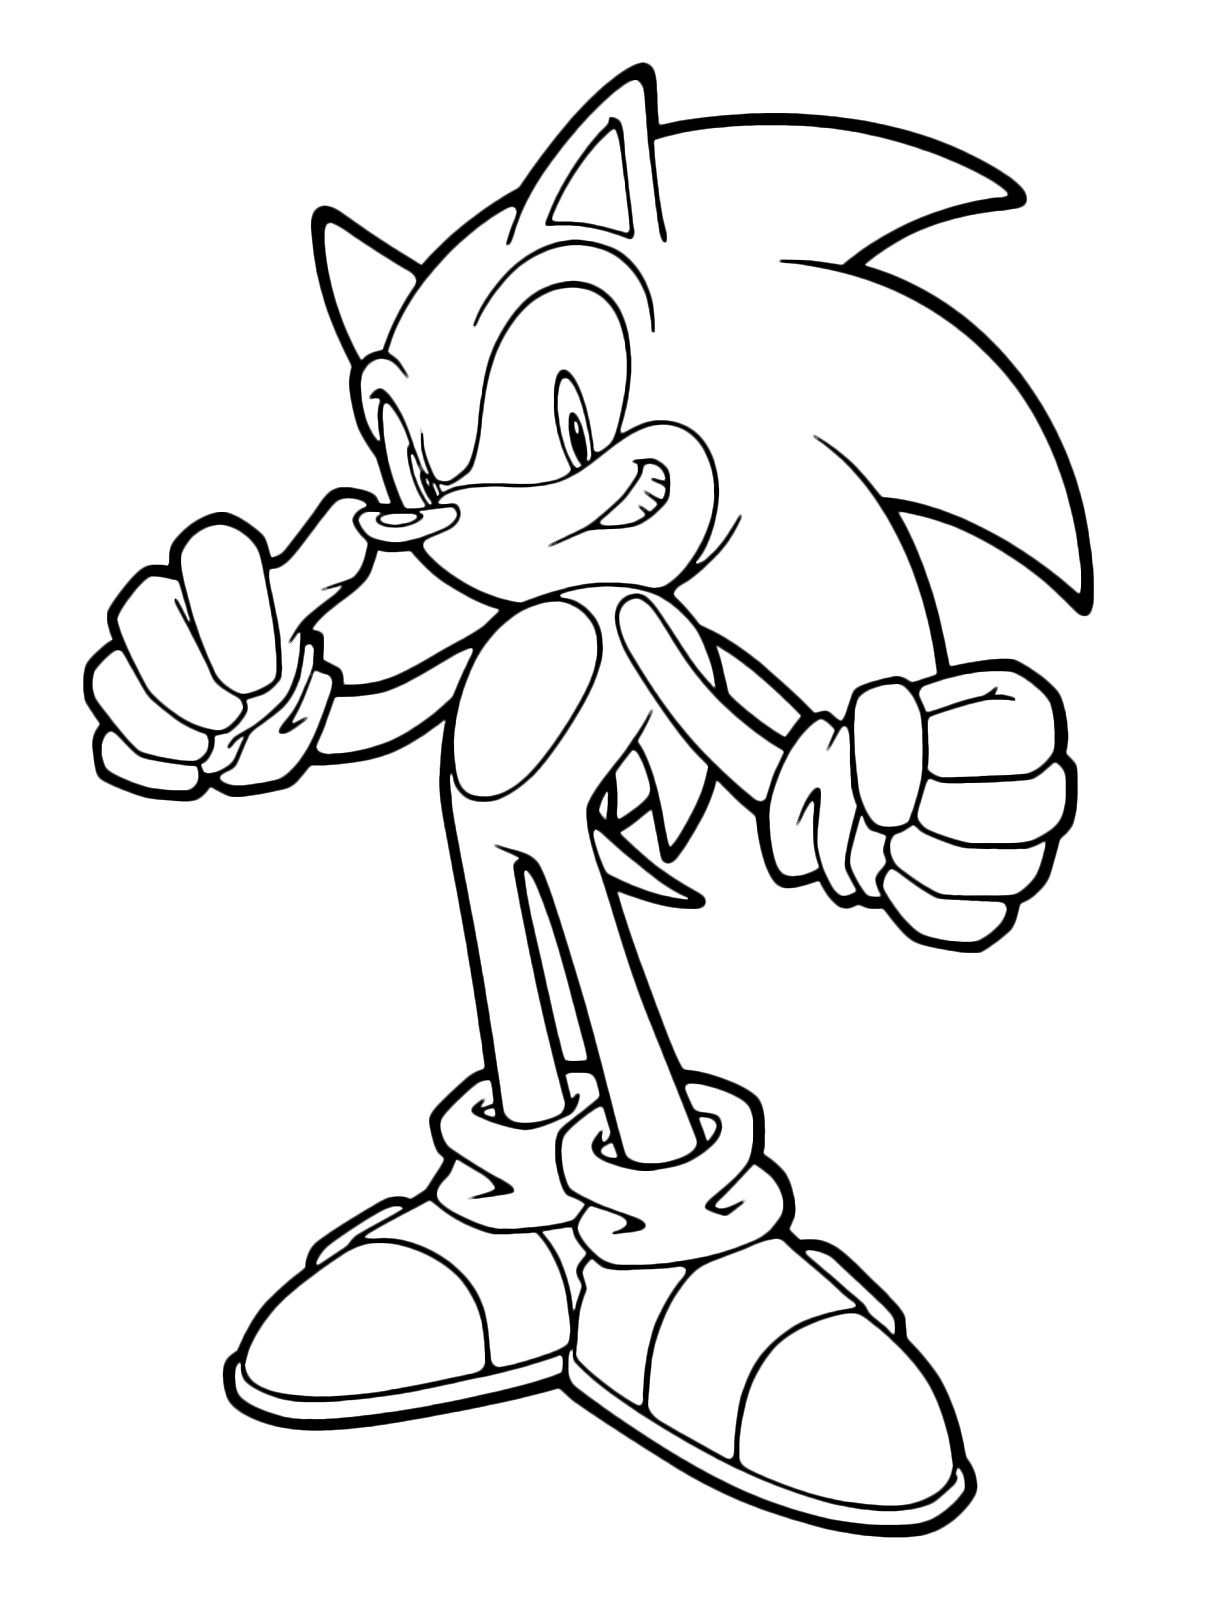 Sonic Boom - Sonic marks himself with his thumb